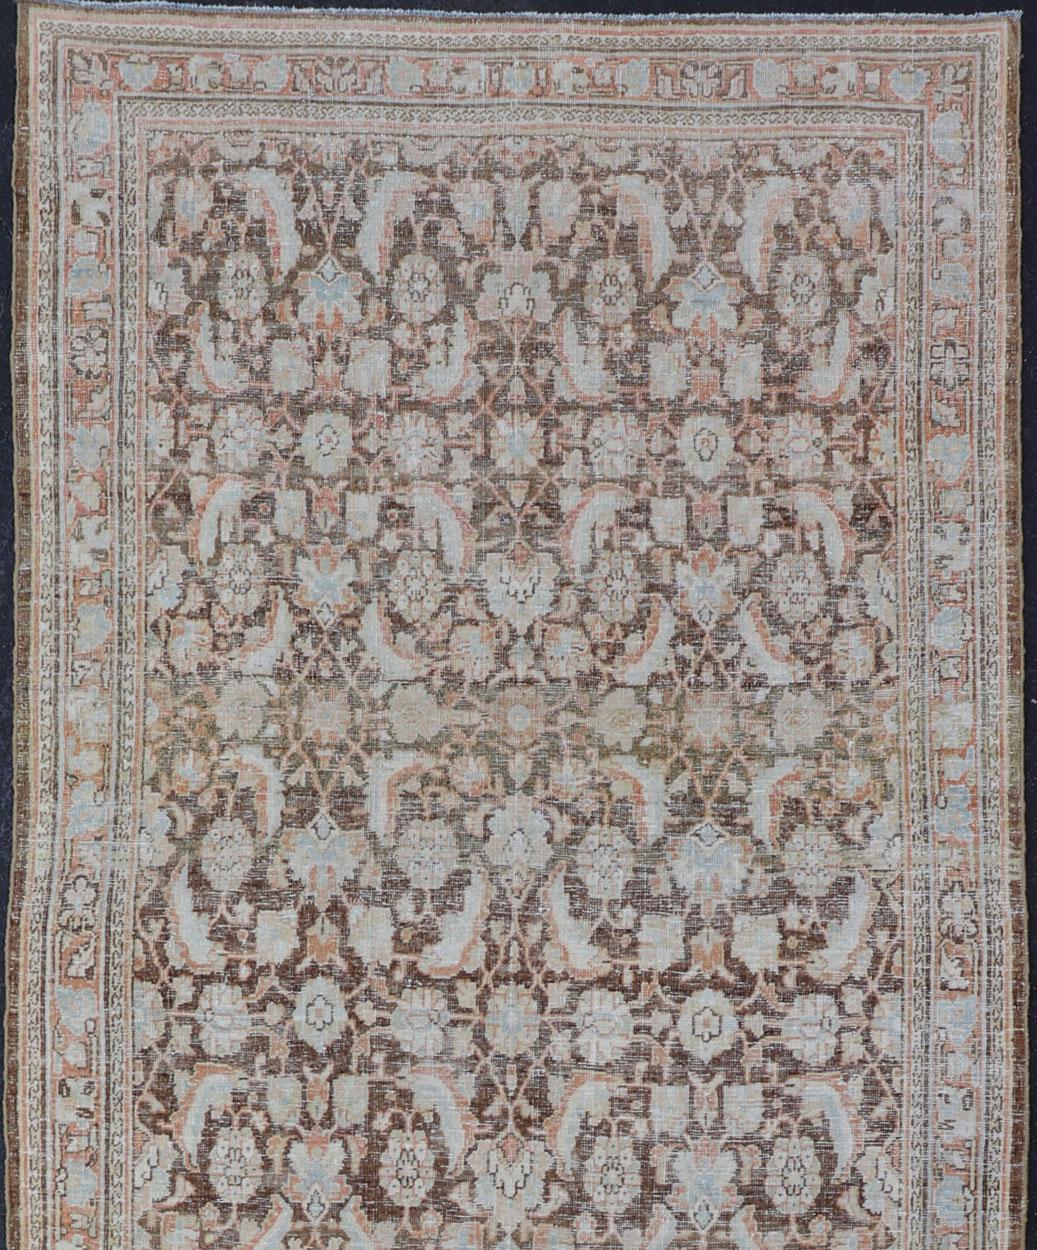 Antique Gallery Mahal gallery rug with colorful, bold design, Keivan Woven Ars / rug EMB-8536-178964, country of origin / type: Iran / Mahal, circa 1920

This antique Persian Mahal carpet features colors of browns and soft orange An all-over,